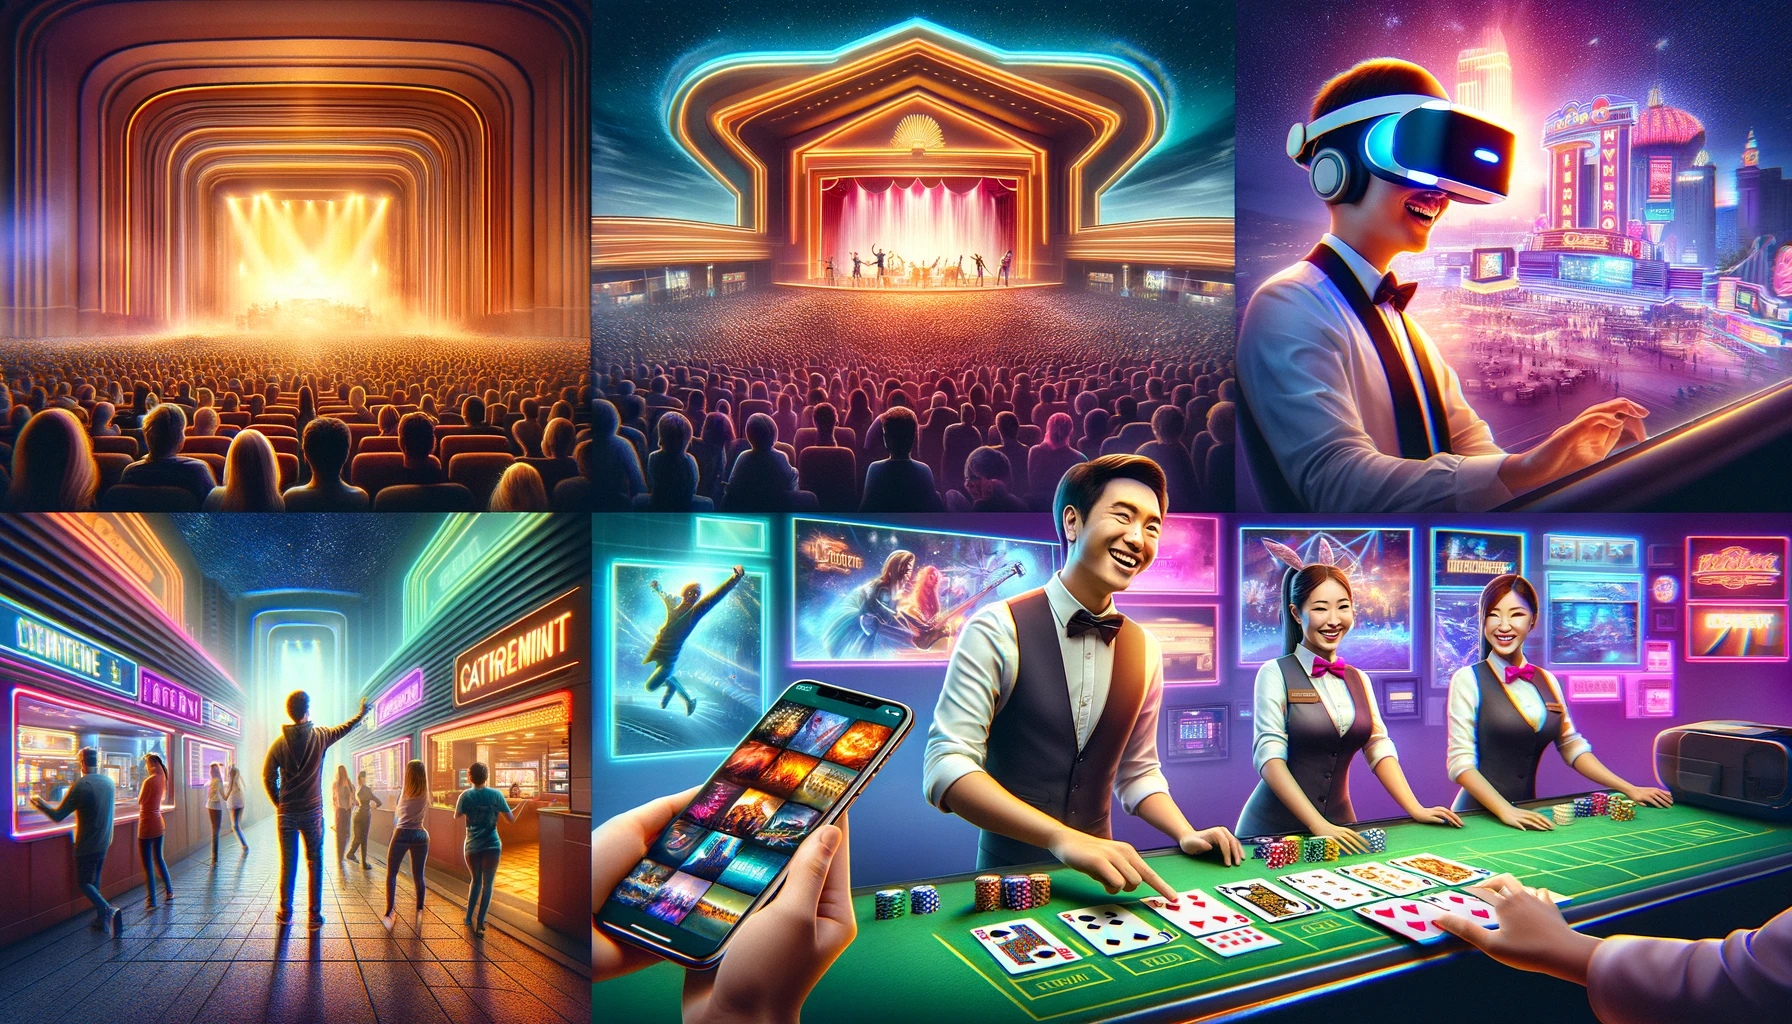 A vibrant collage representing various elements of a captivating casino entertainment strategy: live concert, VR gaming, customer service, social media engagement, and group enjoyment.